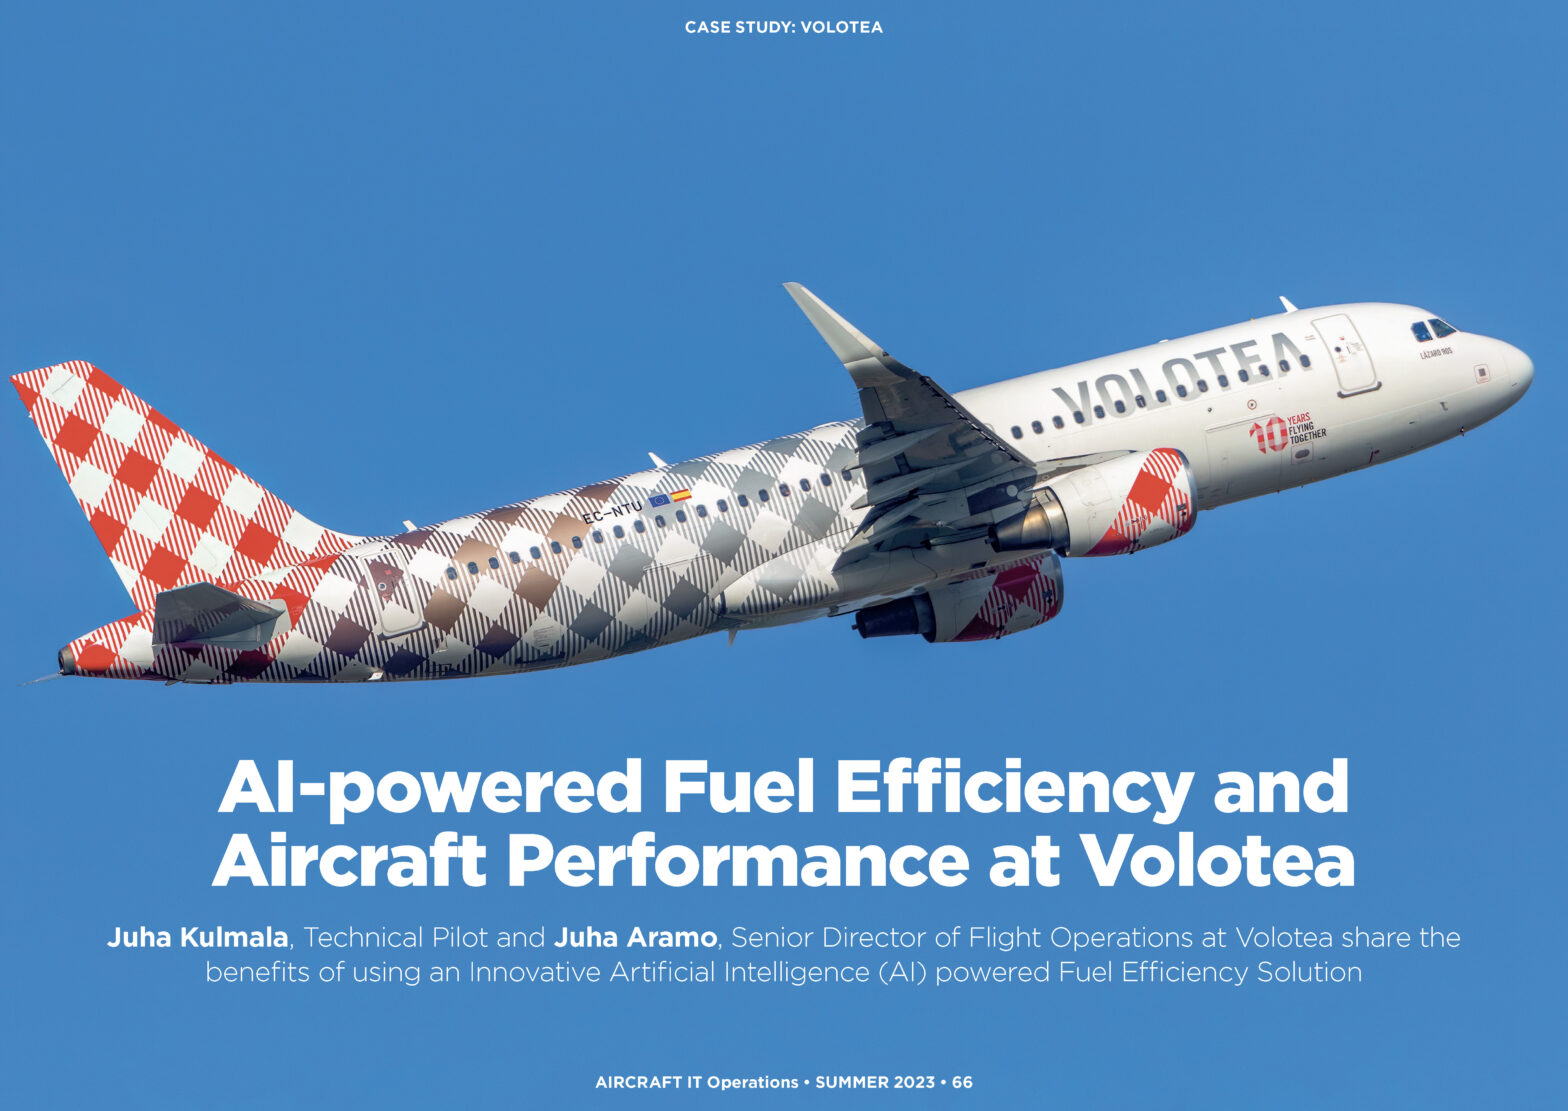 Case Study: AI-powered Fuel Efficiency and Aircraft Performance at Volotea